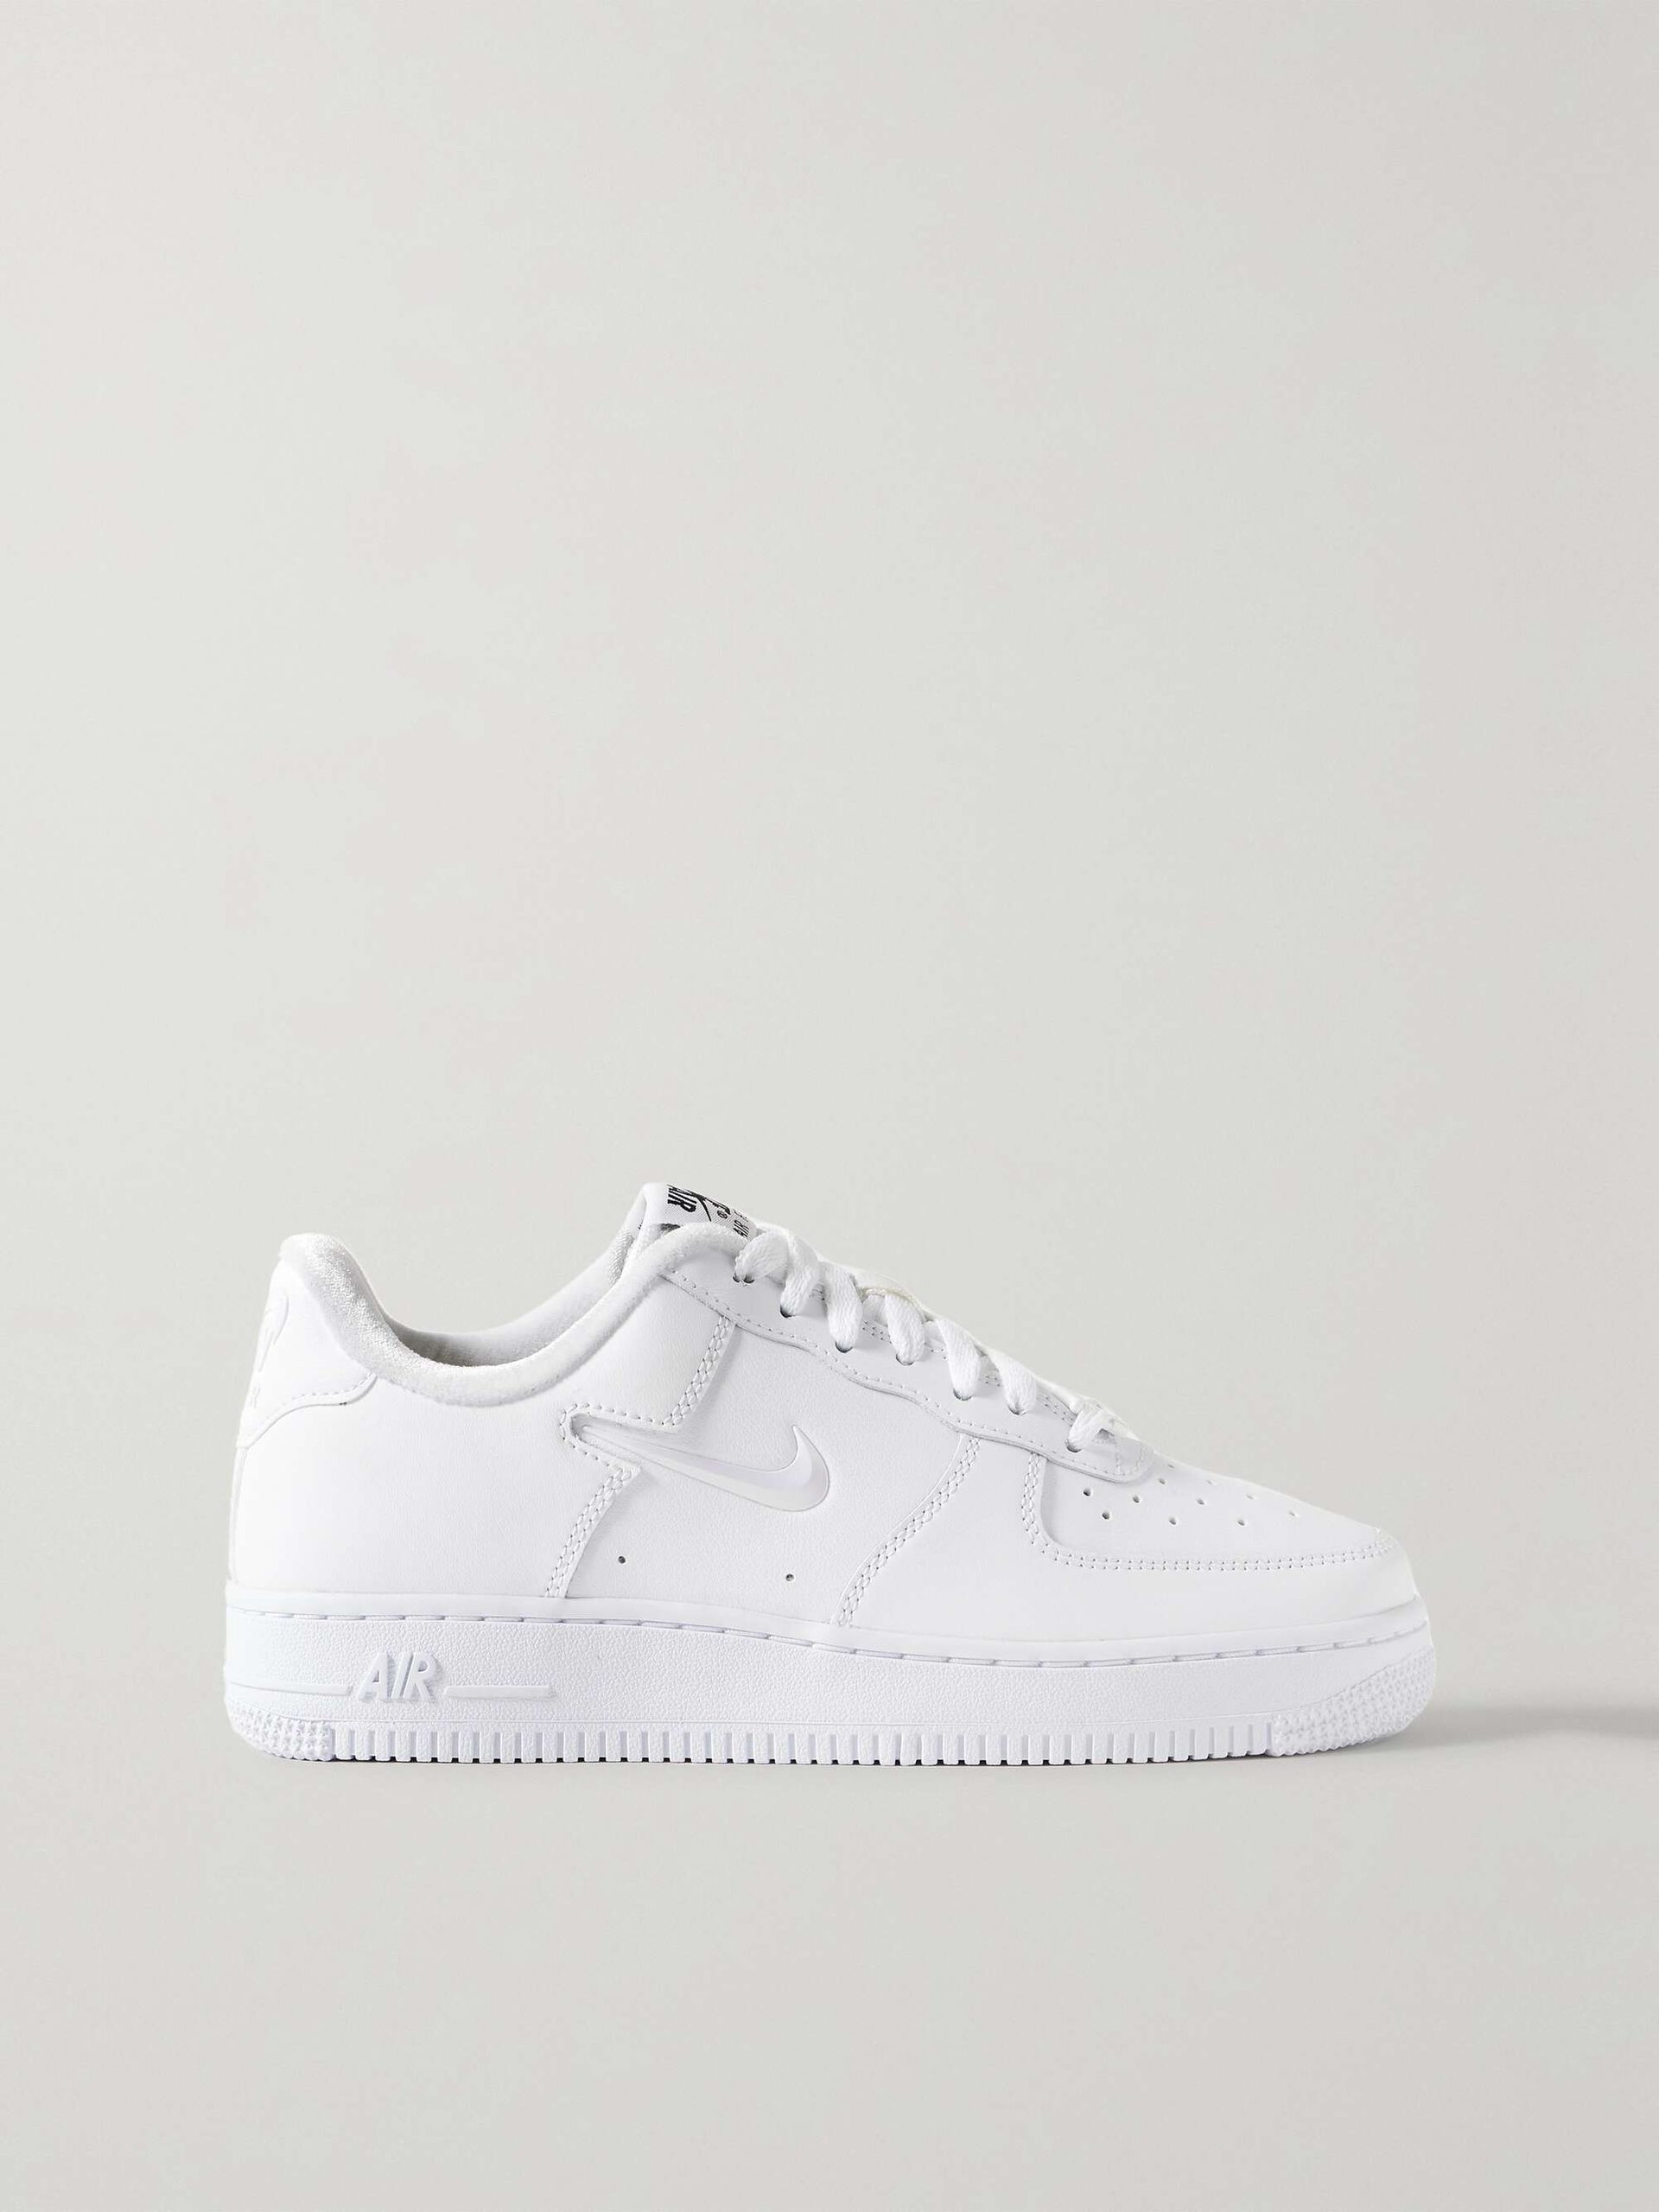 Best White Sneakers 242063 1704679473616 Main 1920 80 